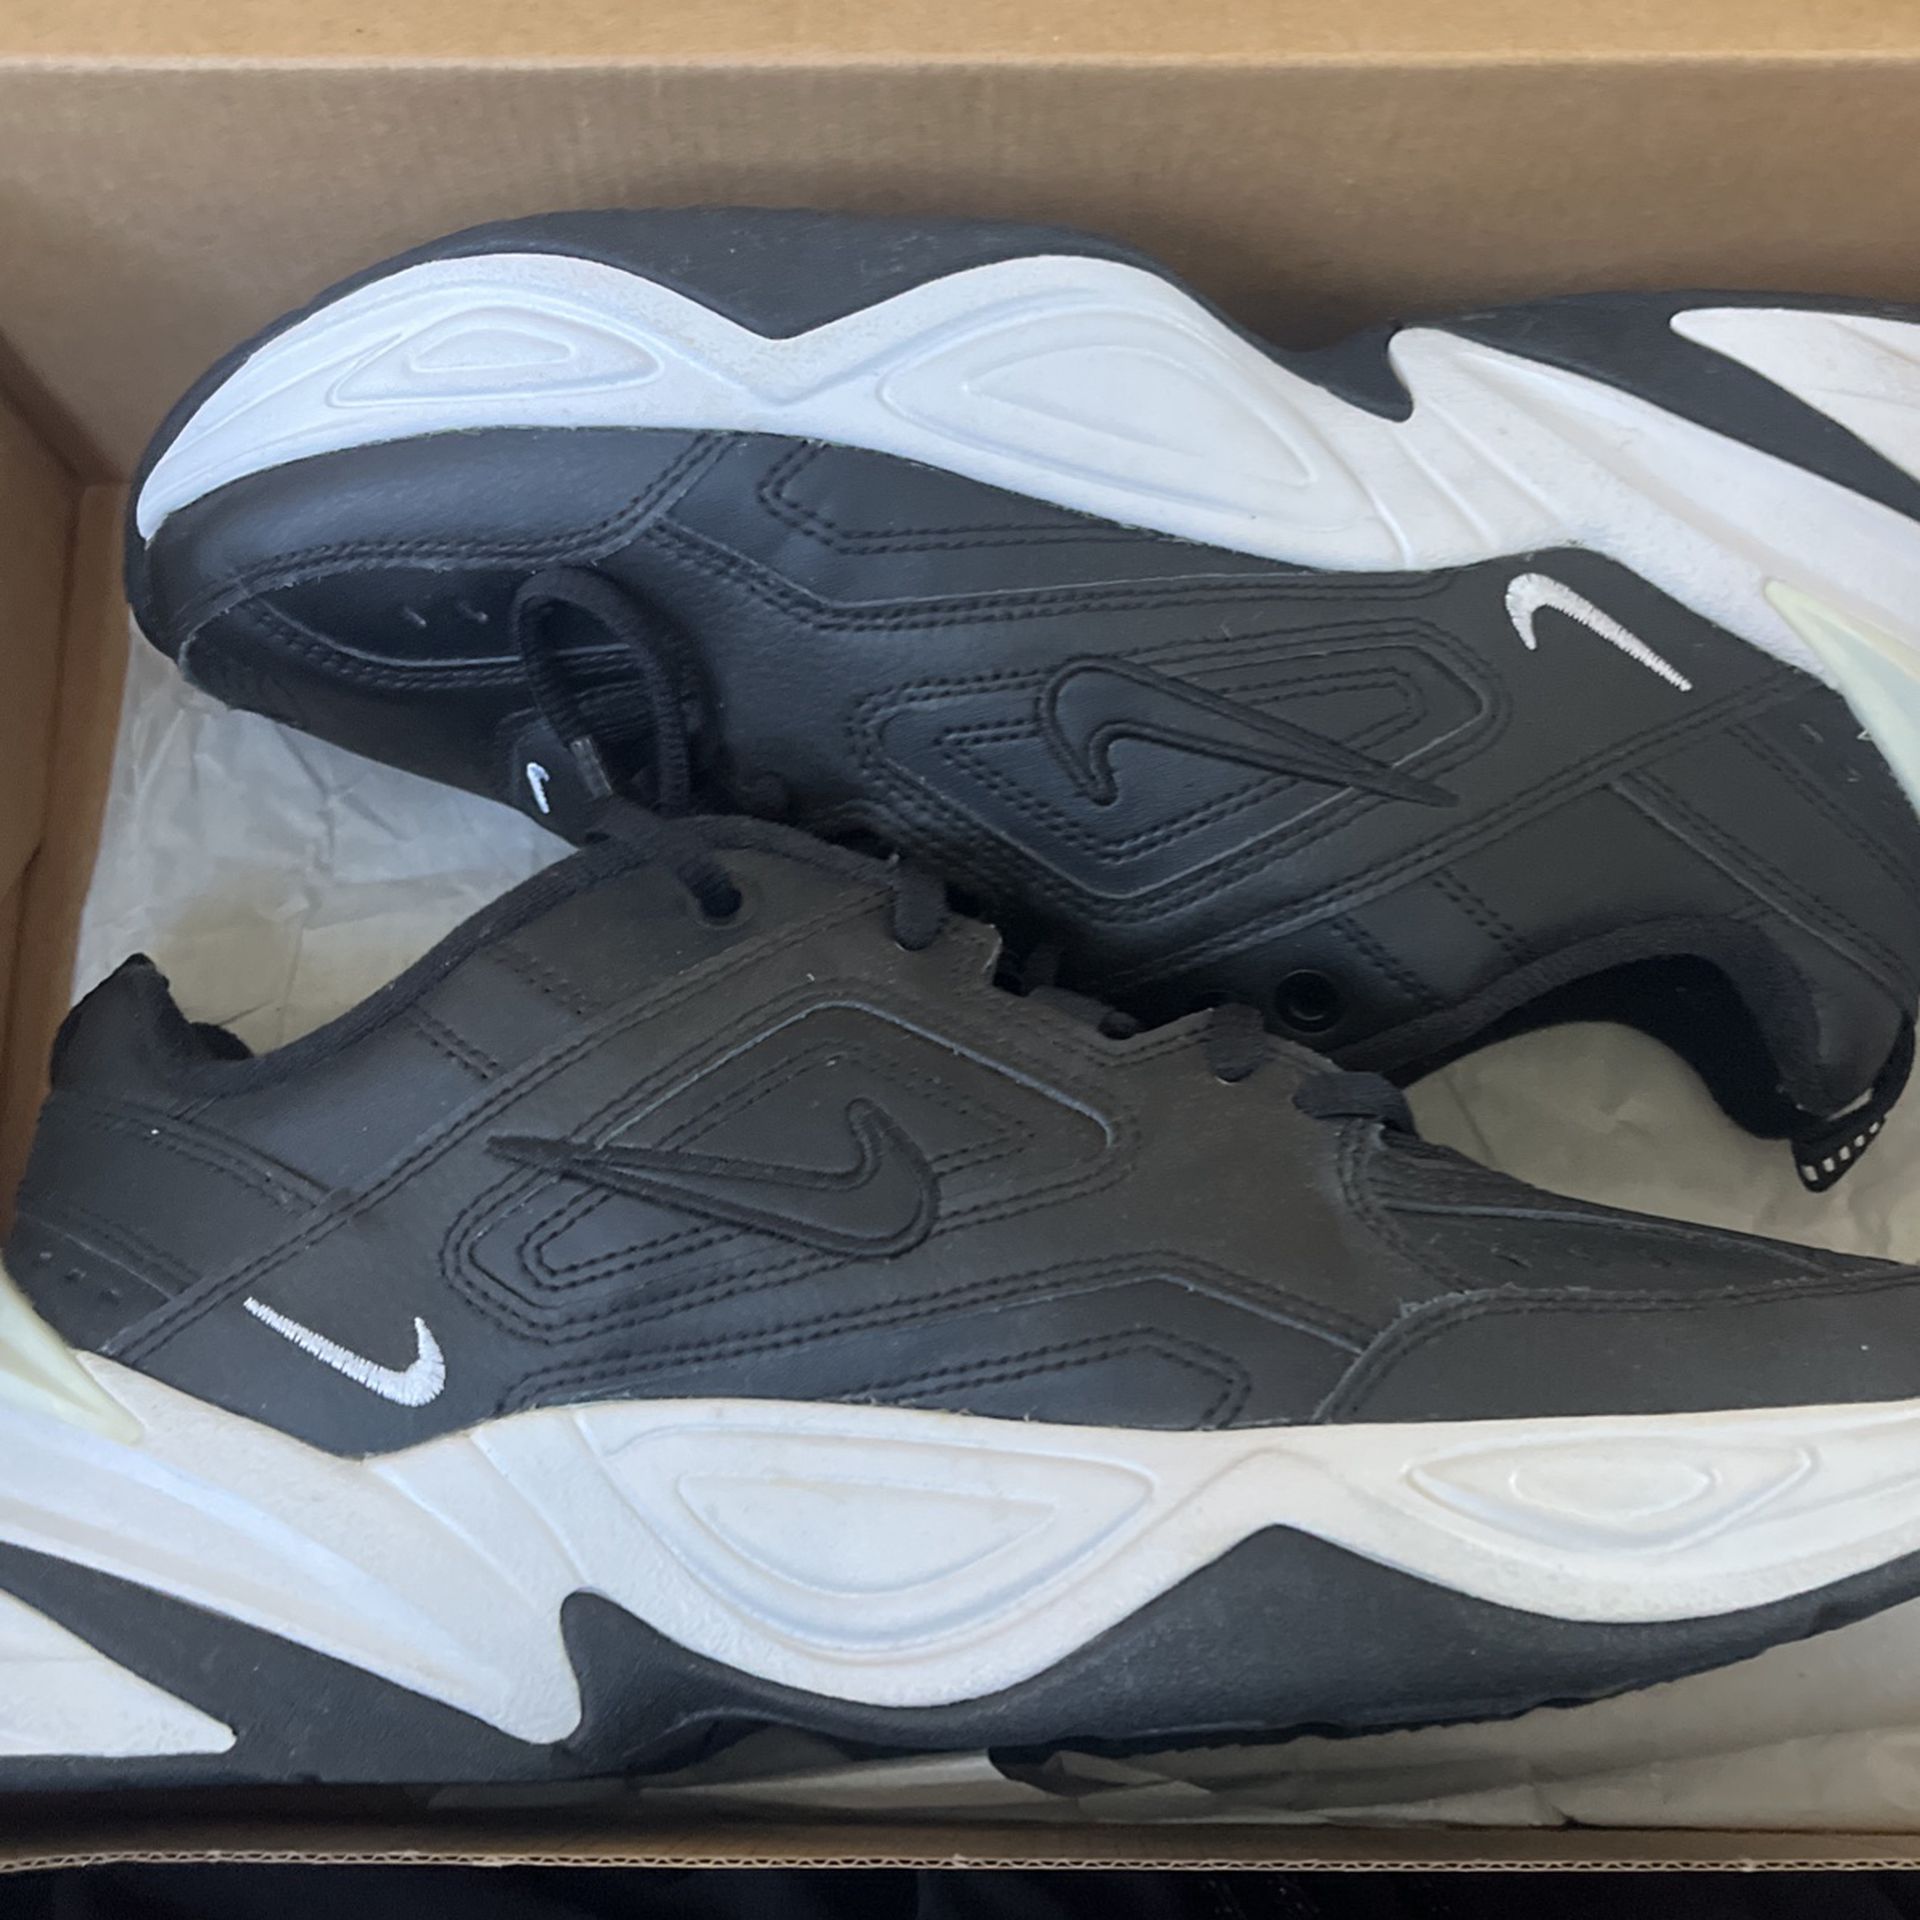 W Nike M2’s Tekno Shoes - Size 9.5 for Sale in Spring Valley, CA - OfferUp